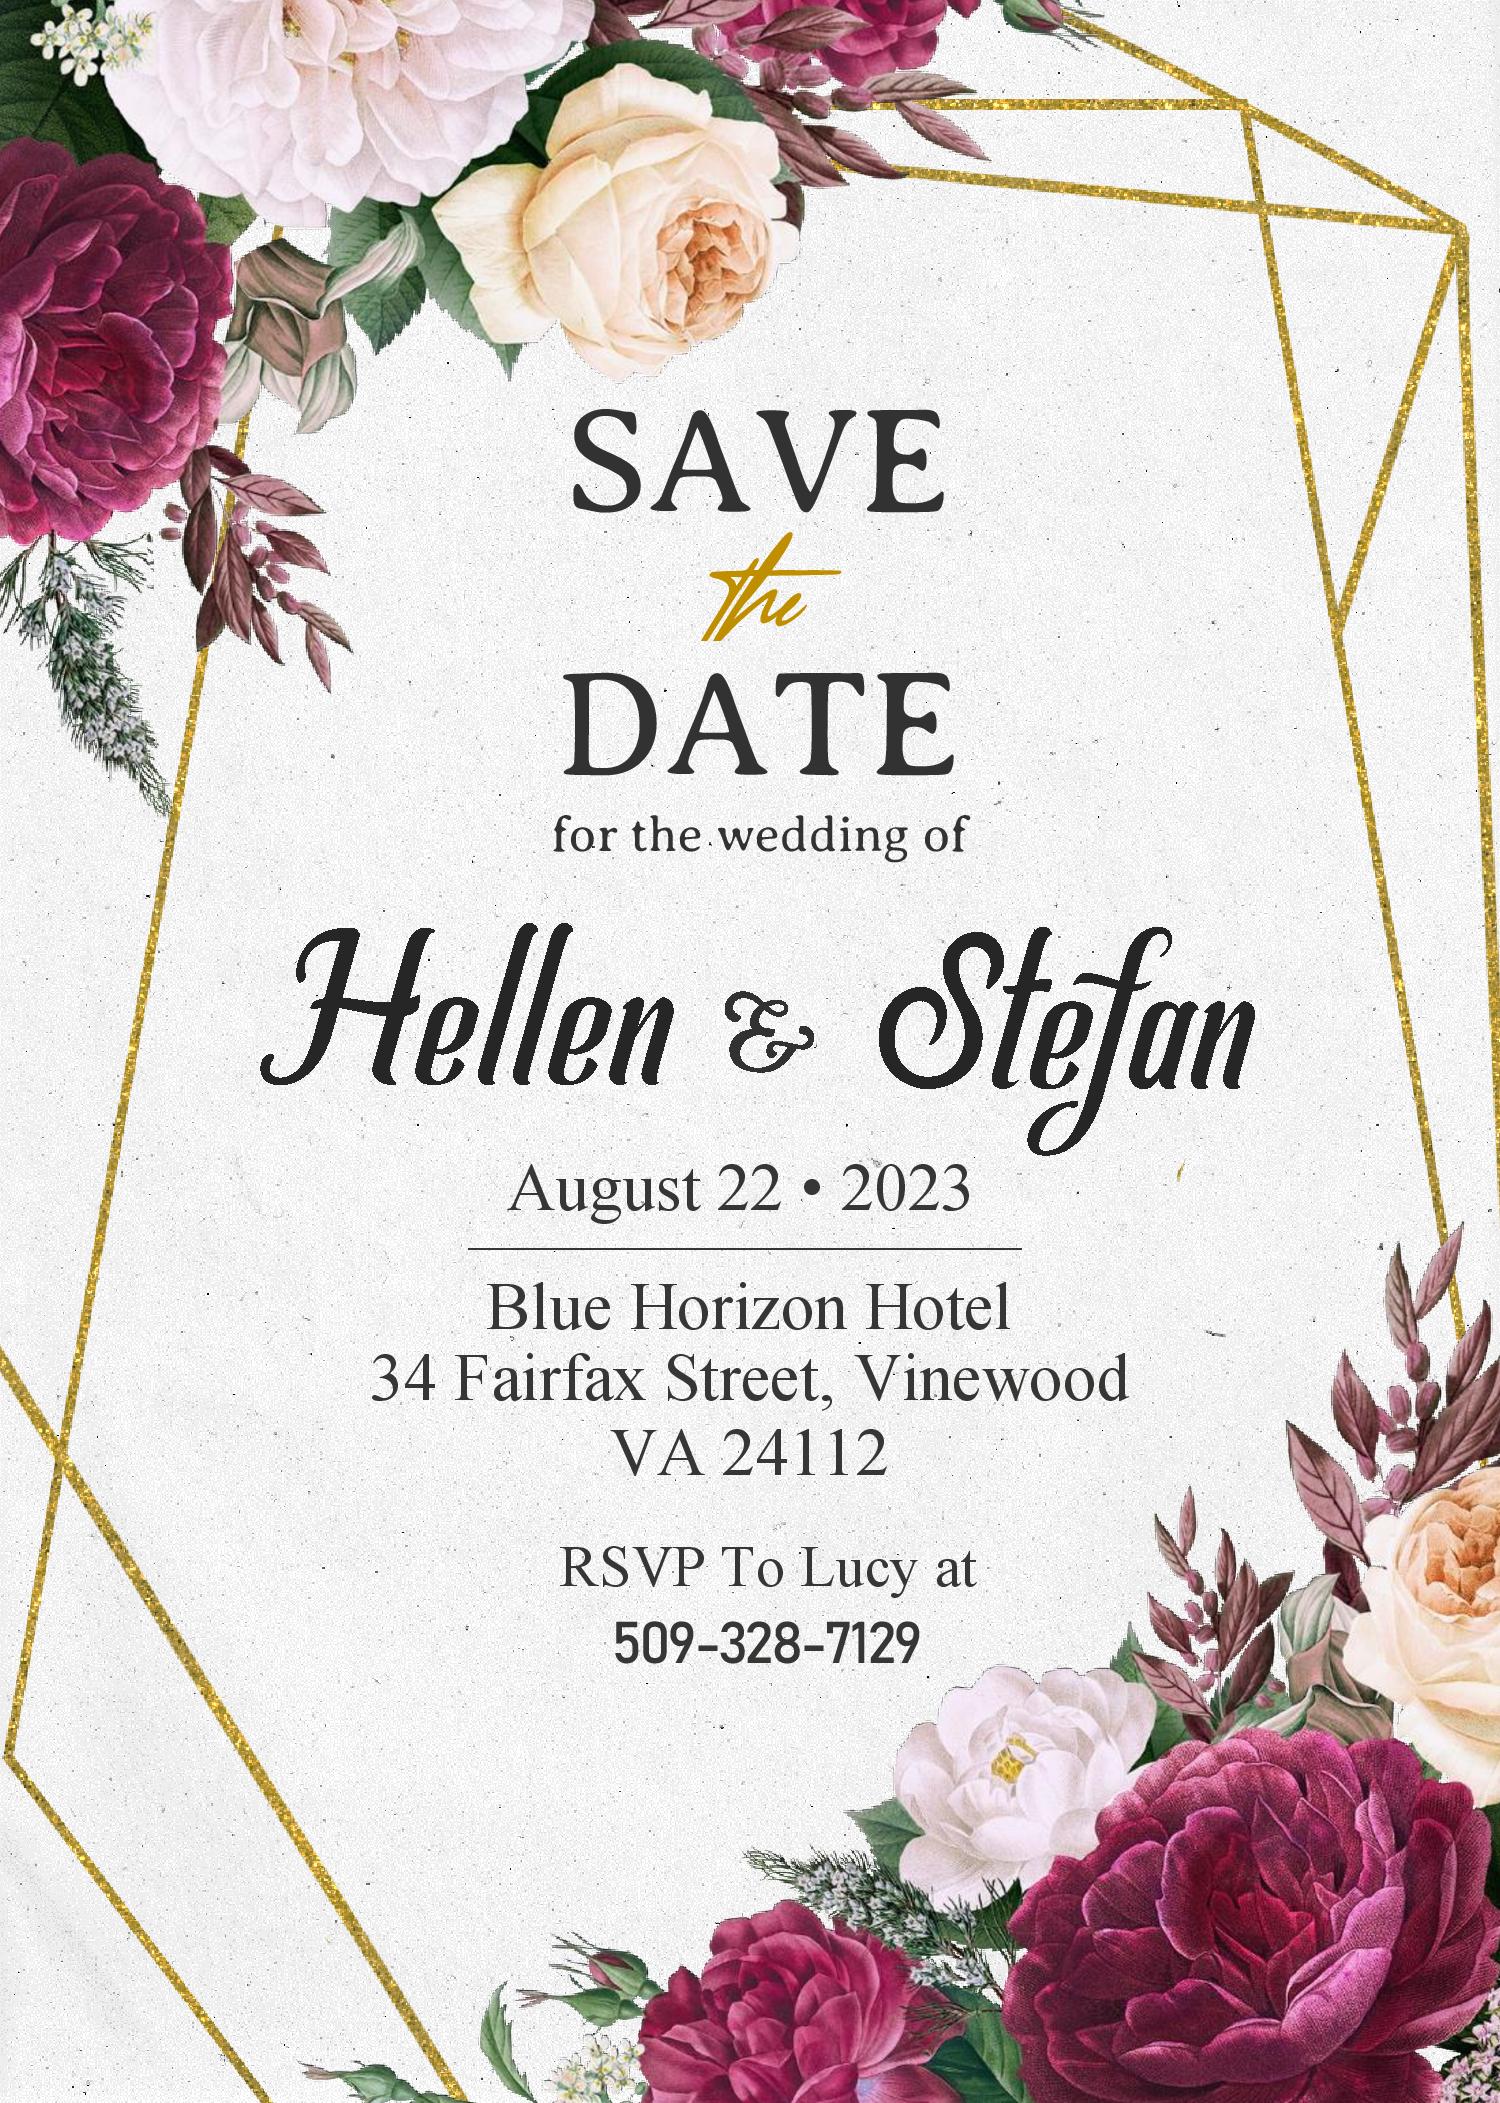 Save The Date Invitation Templates Editable With MS Word FREE